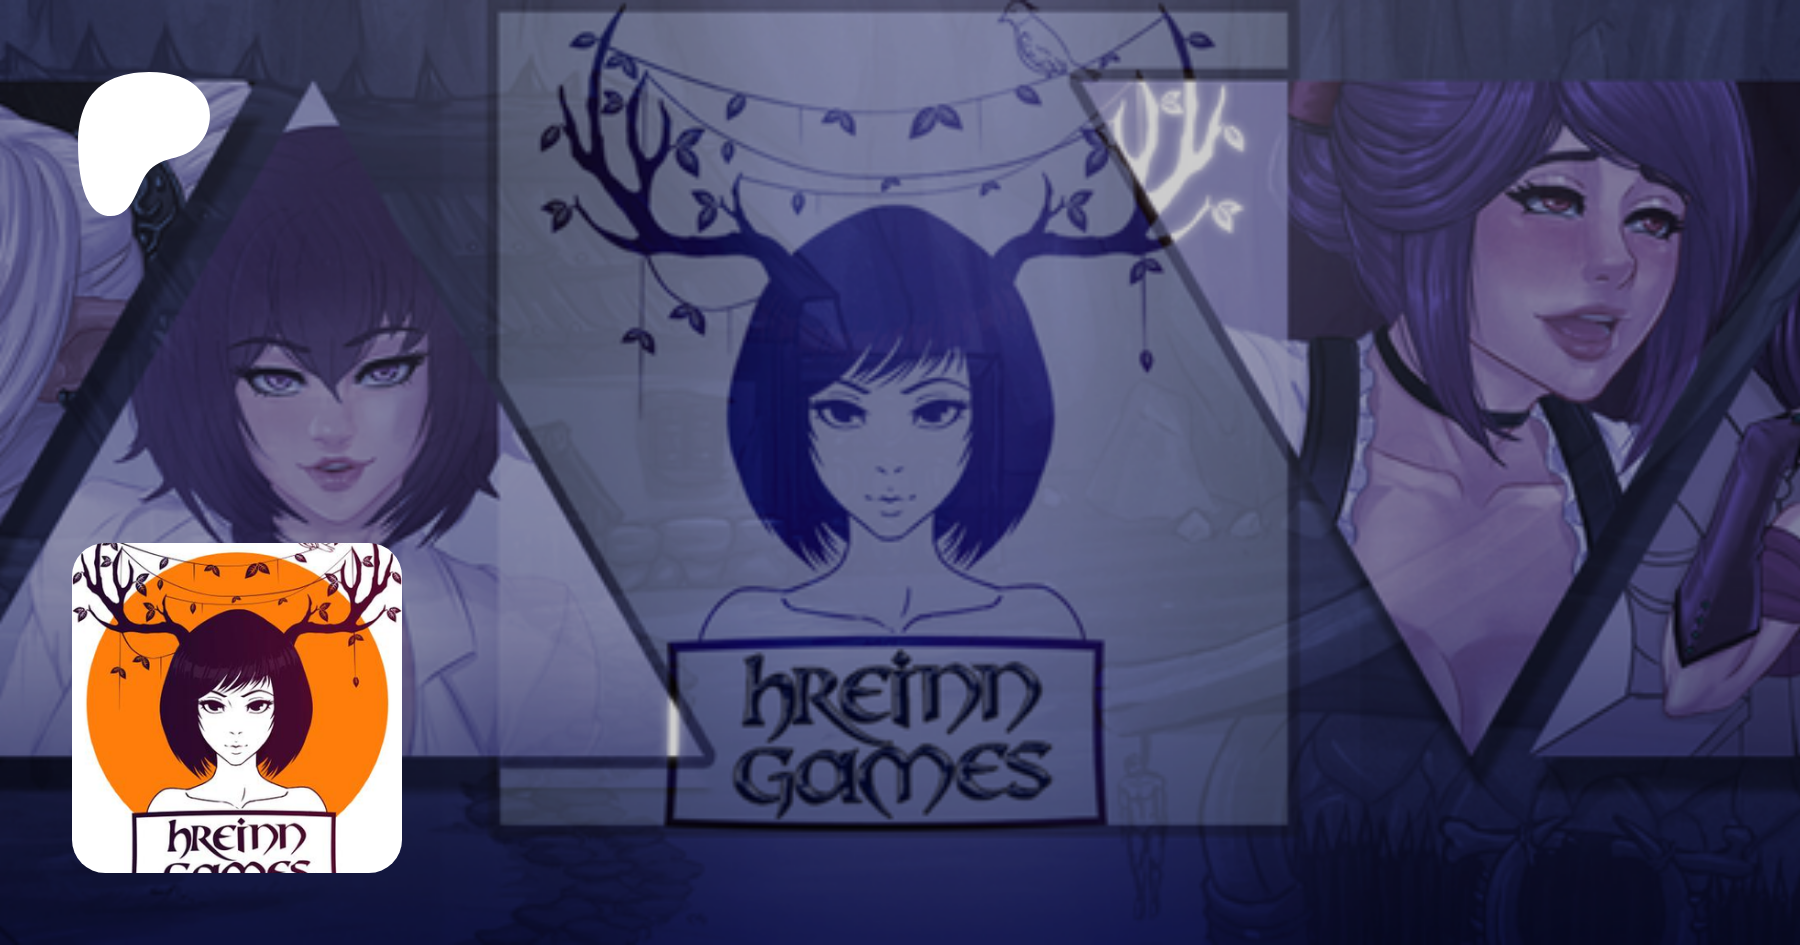 Fuck Nights at Fredrika's [18+] v0.1 MOD APK -  - Android &  iOS MODs, Mobile Games & Apps